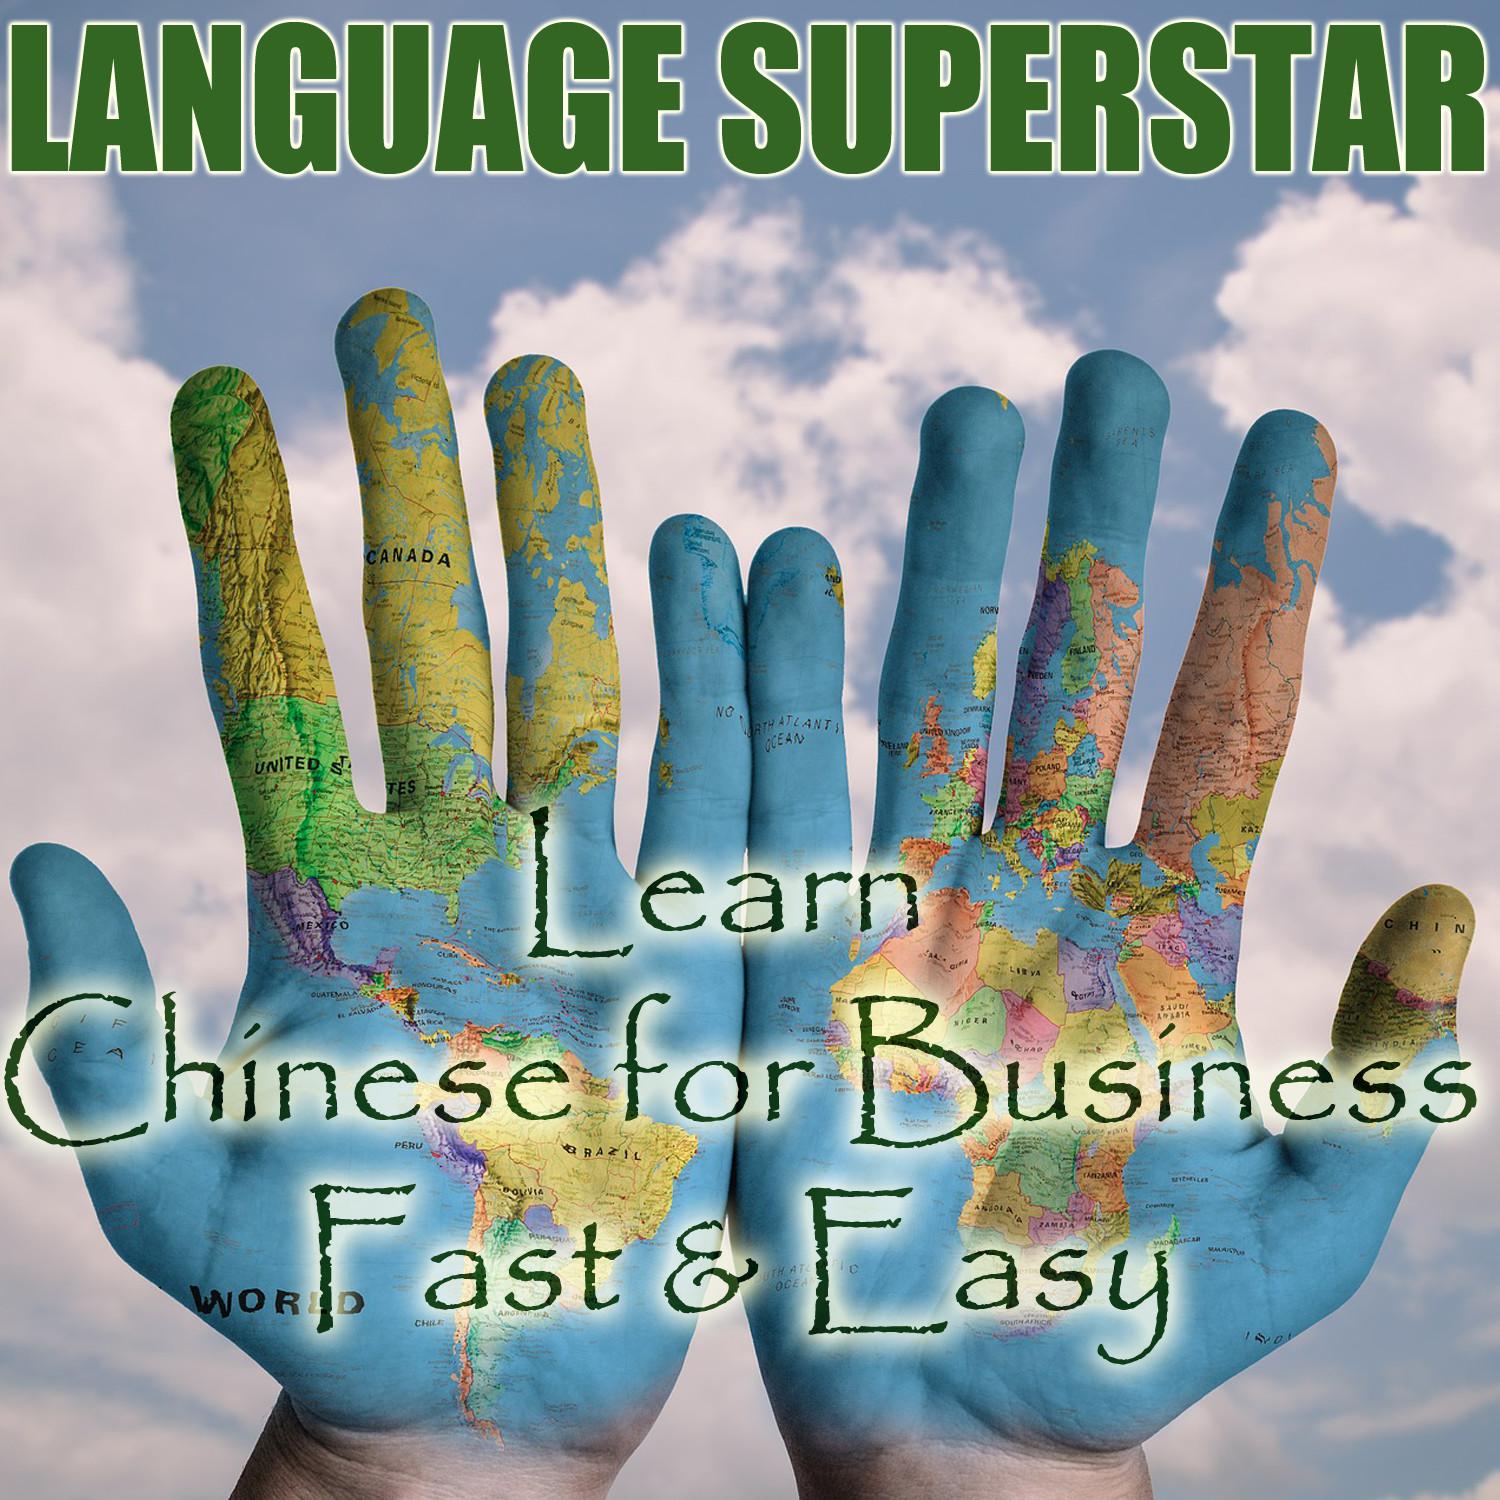 Learn Chinese for Business Lesson 7